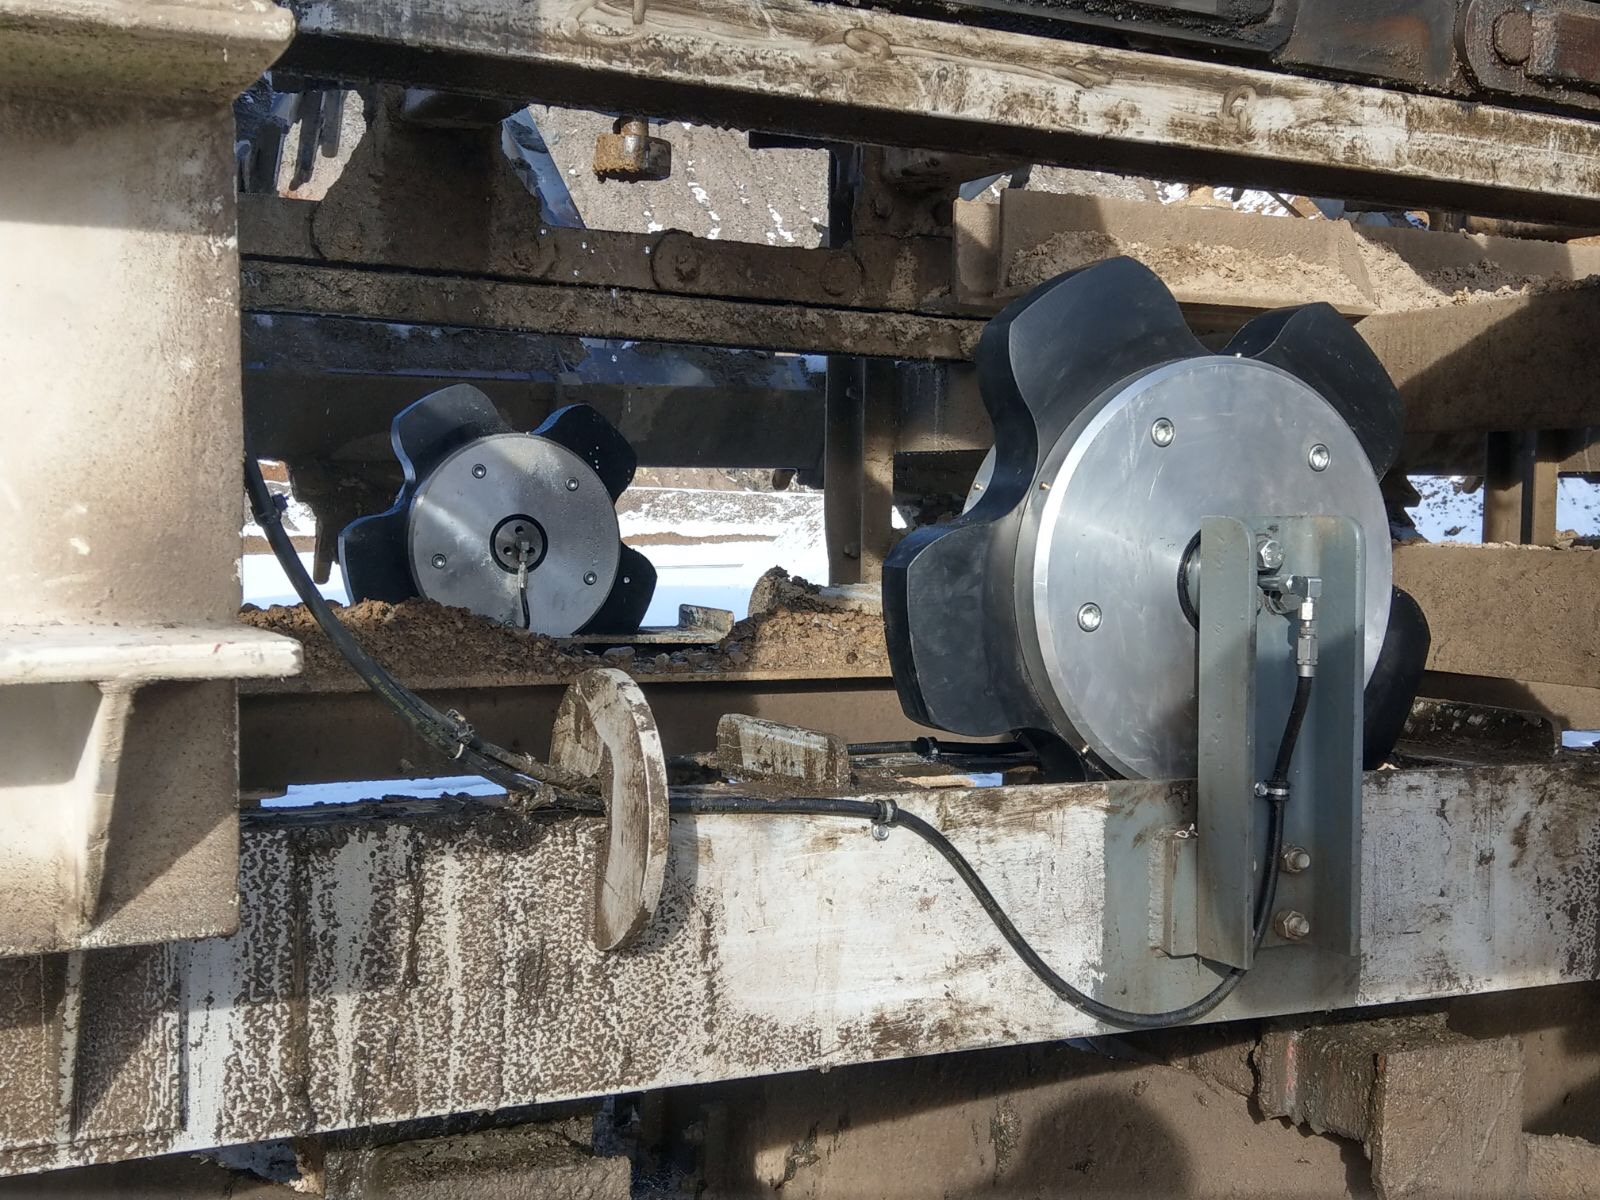 The system features specially designed sprockets to deliver lubricant directly to the pivot points on the chain links where it is needed